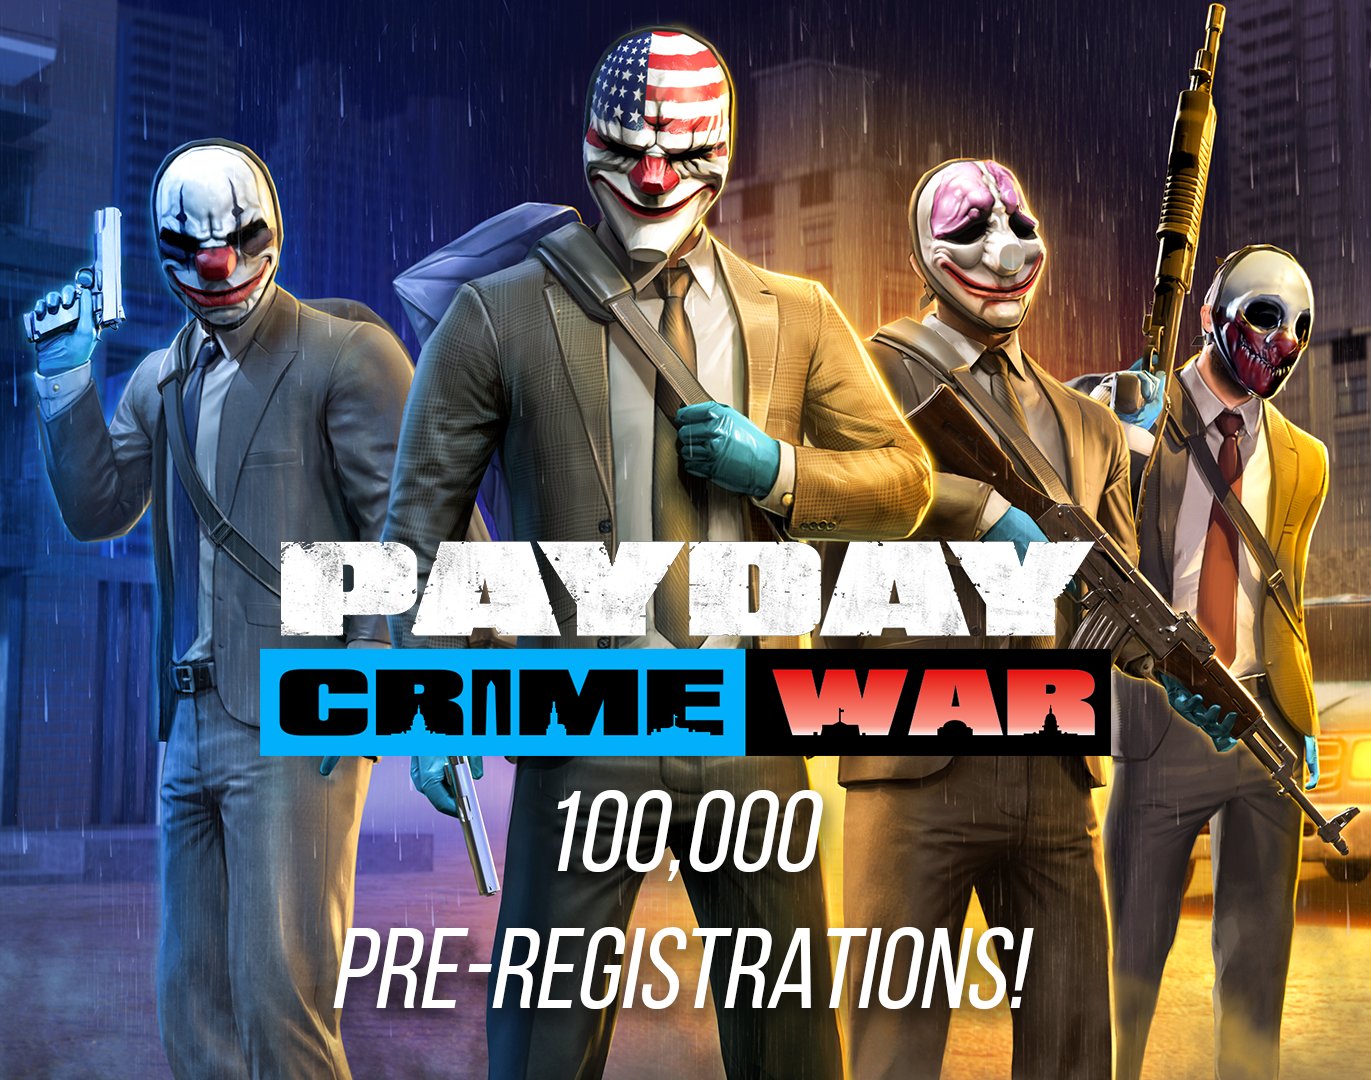 PAYDAY 3 on X: I like those payday numbers 👊😎 / X